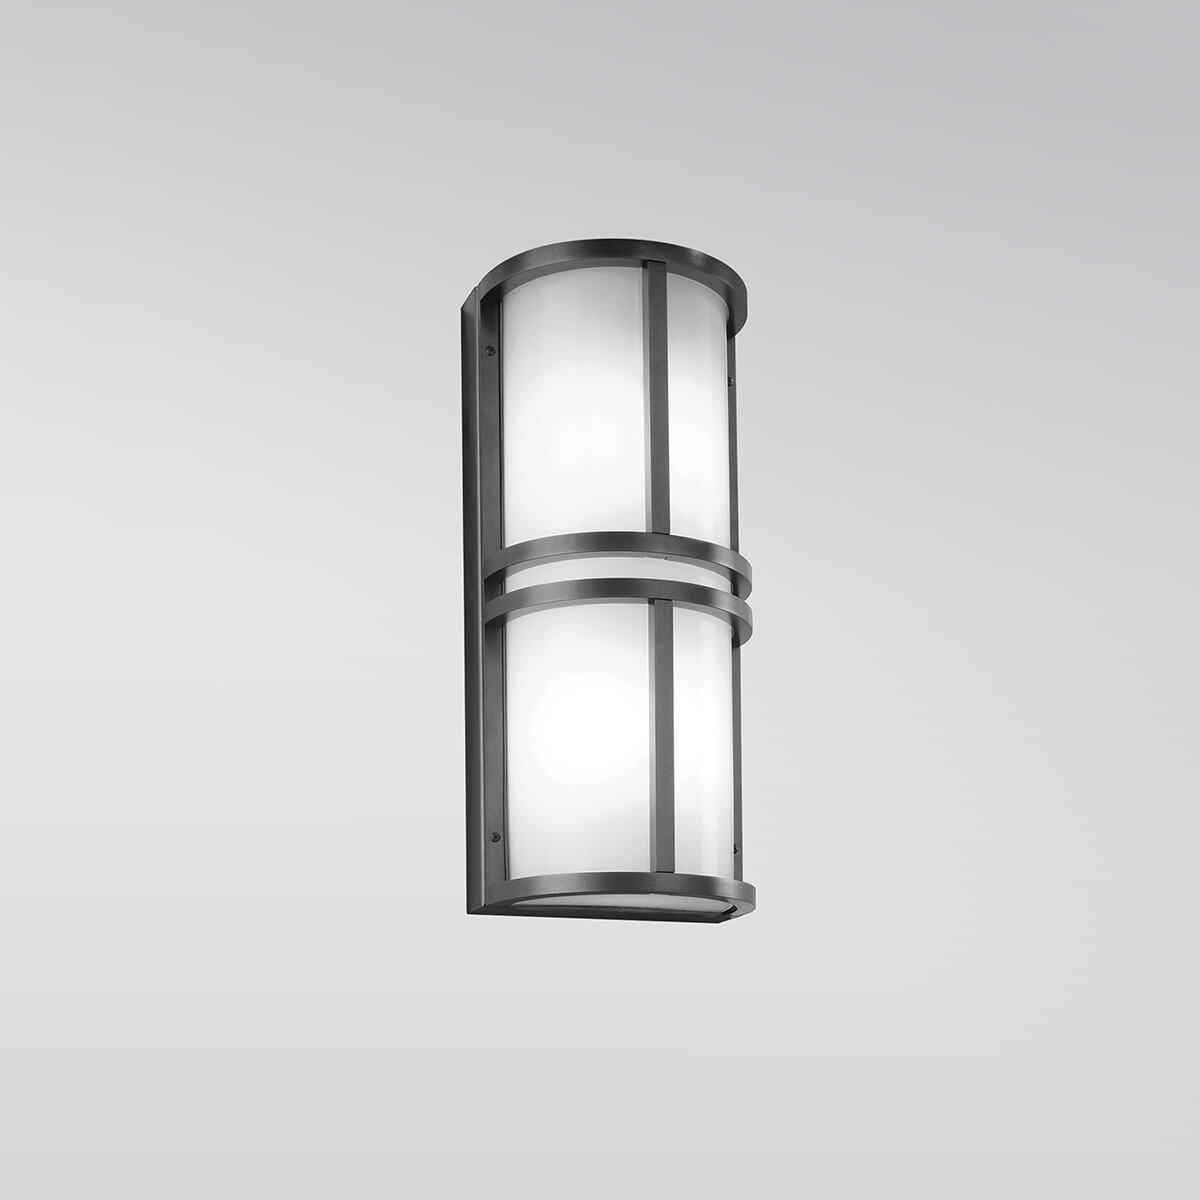 A rectangular outdoor wall sconce with center bar accents